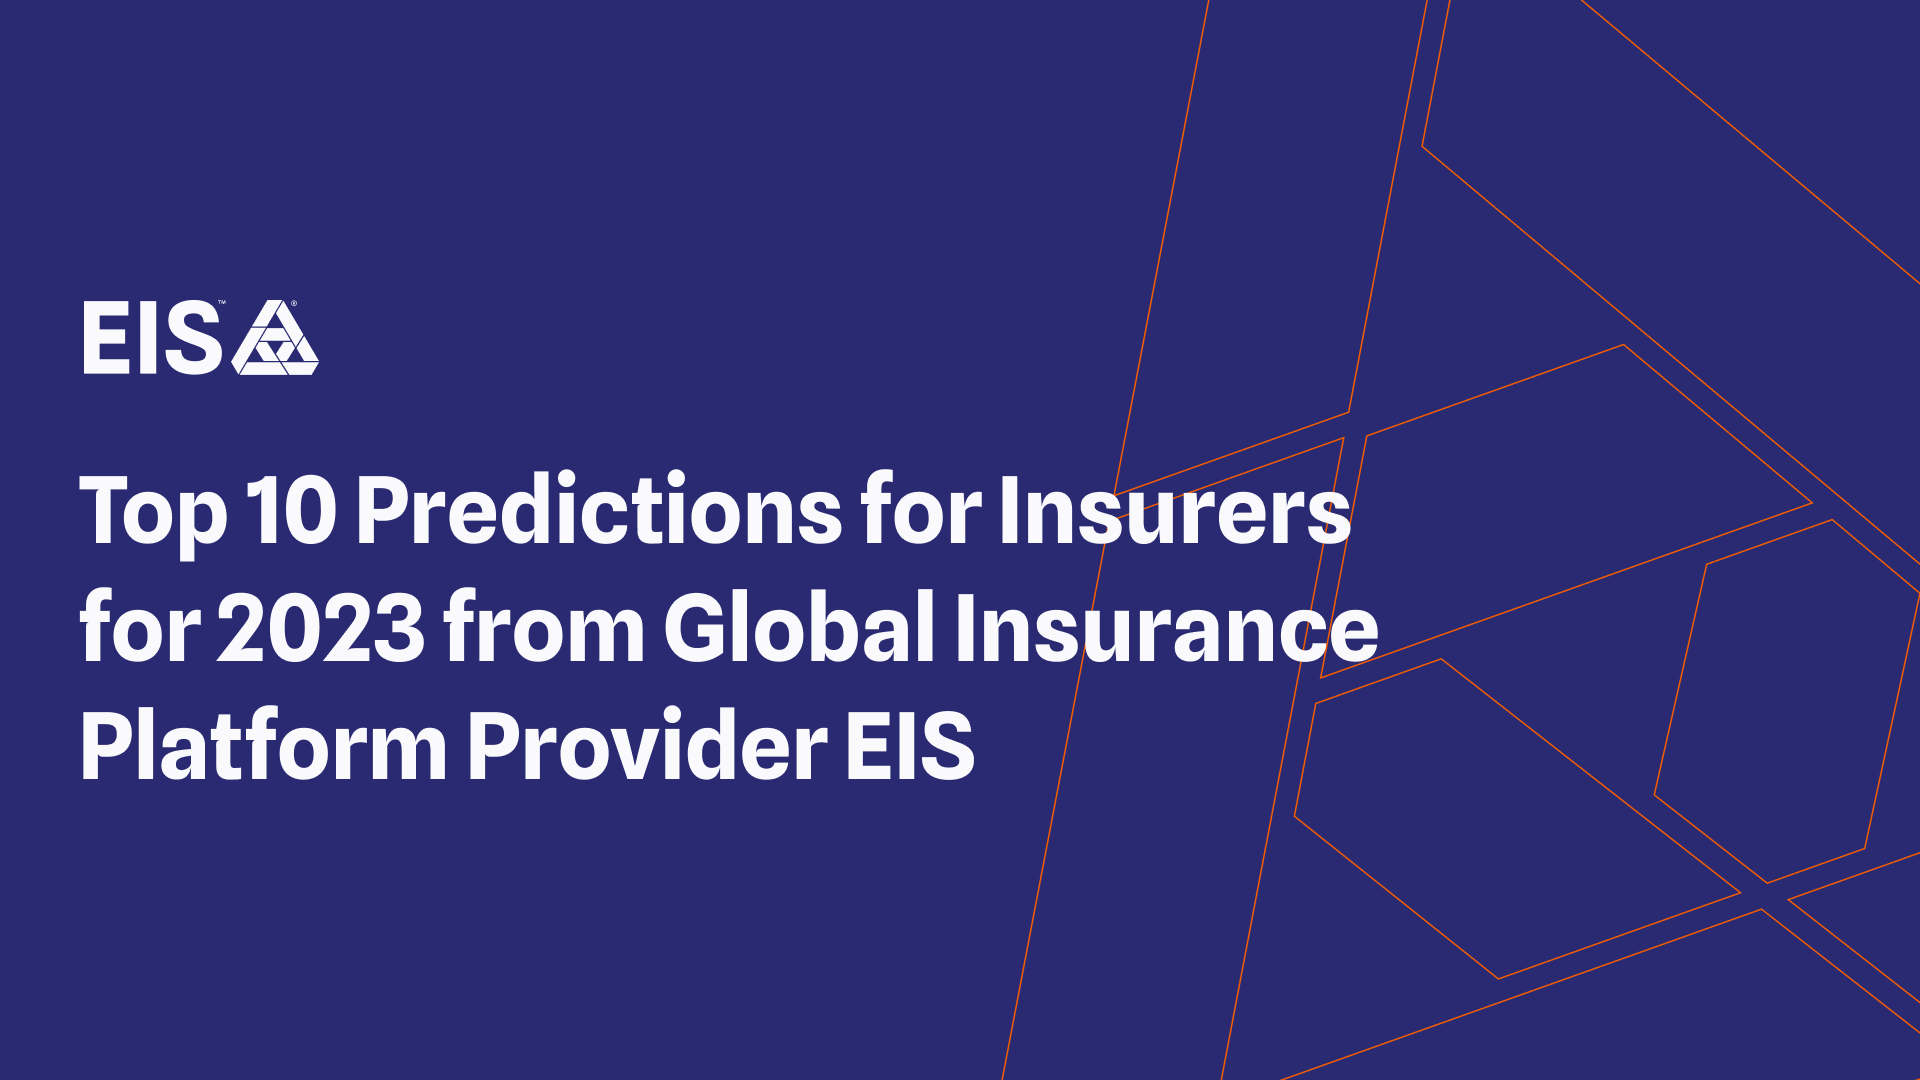 Top 10 Predictions for Insurers for 2023 from Global Insurance Platform Provider EIS